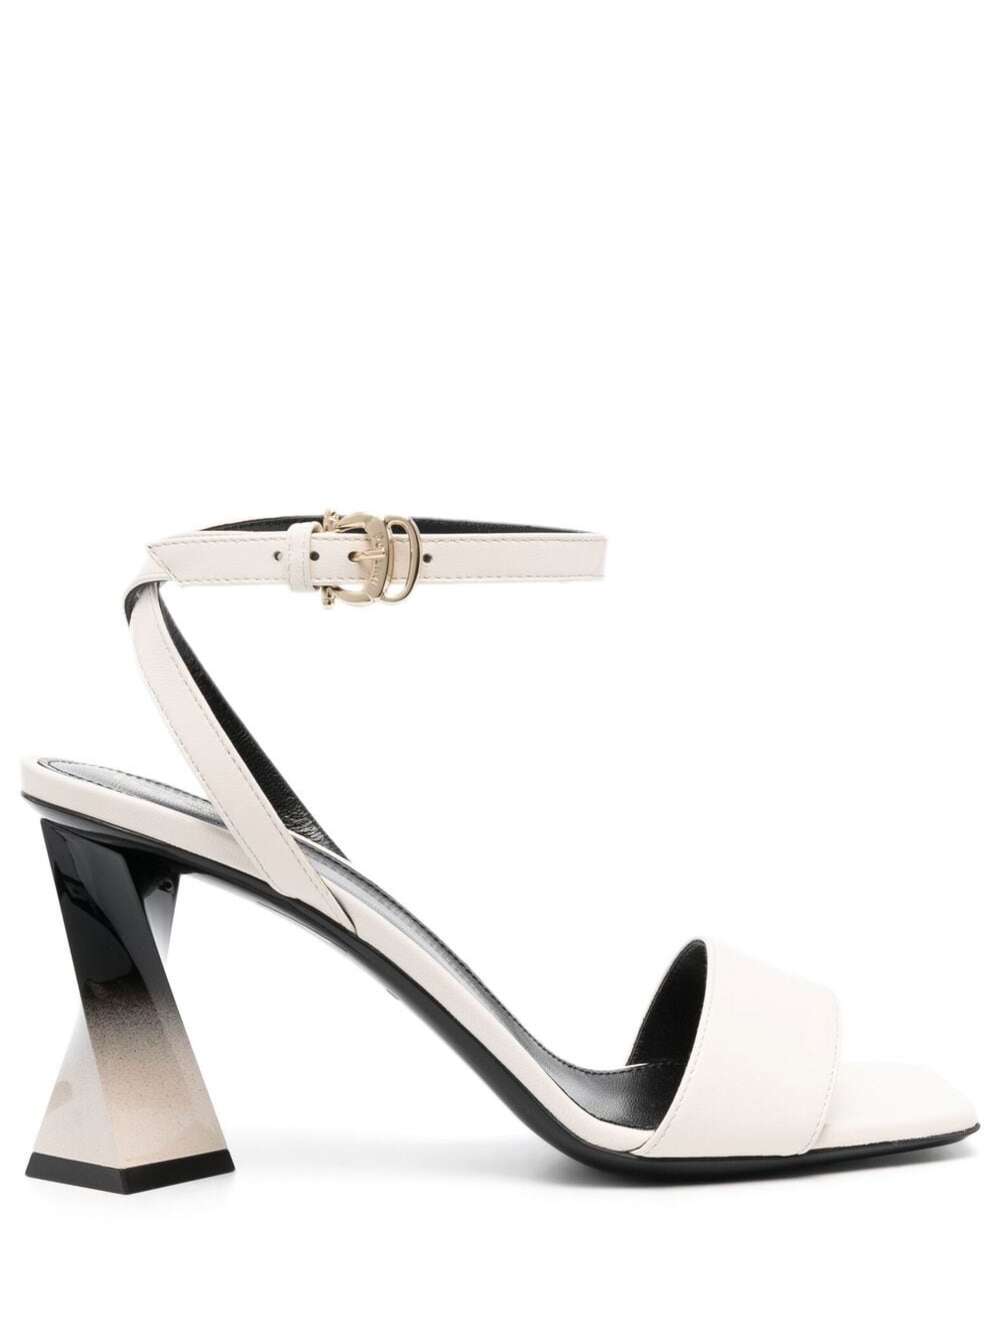 Pollini Womans White Leather Sandals With Sculpted Heel